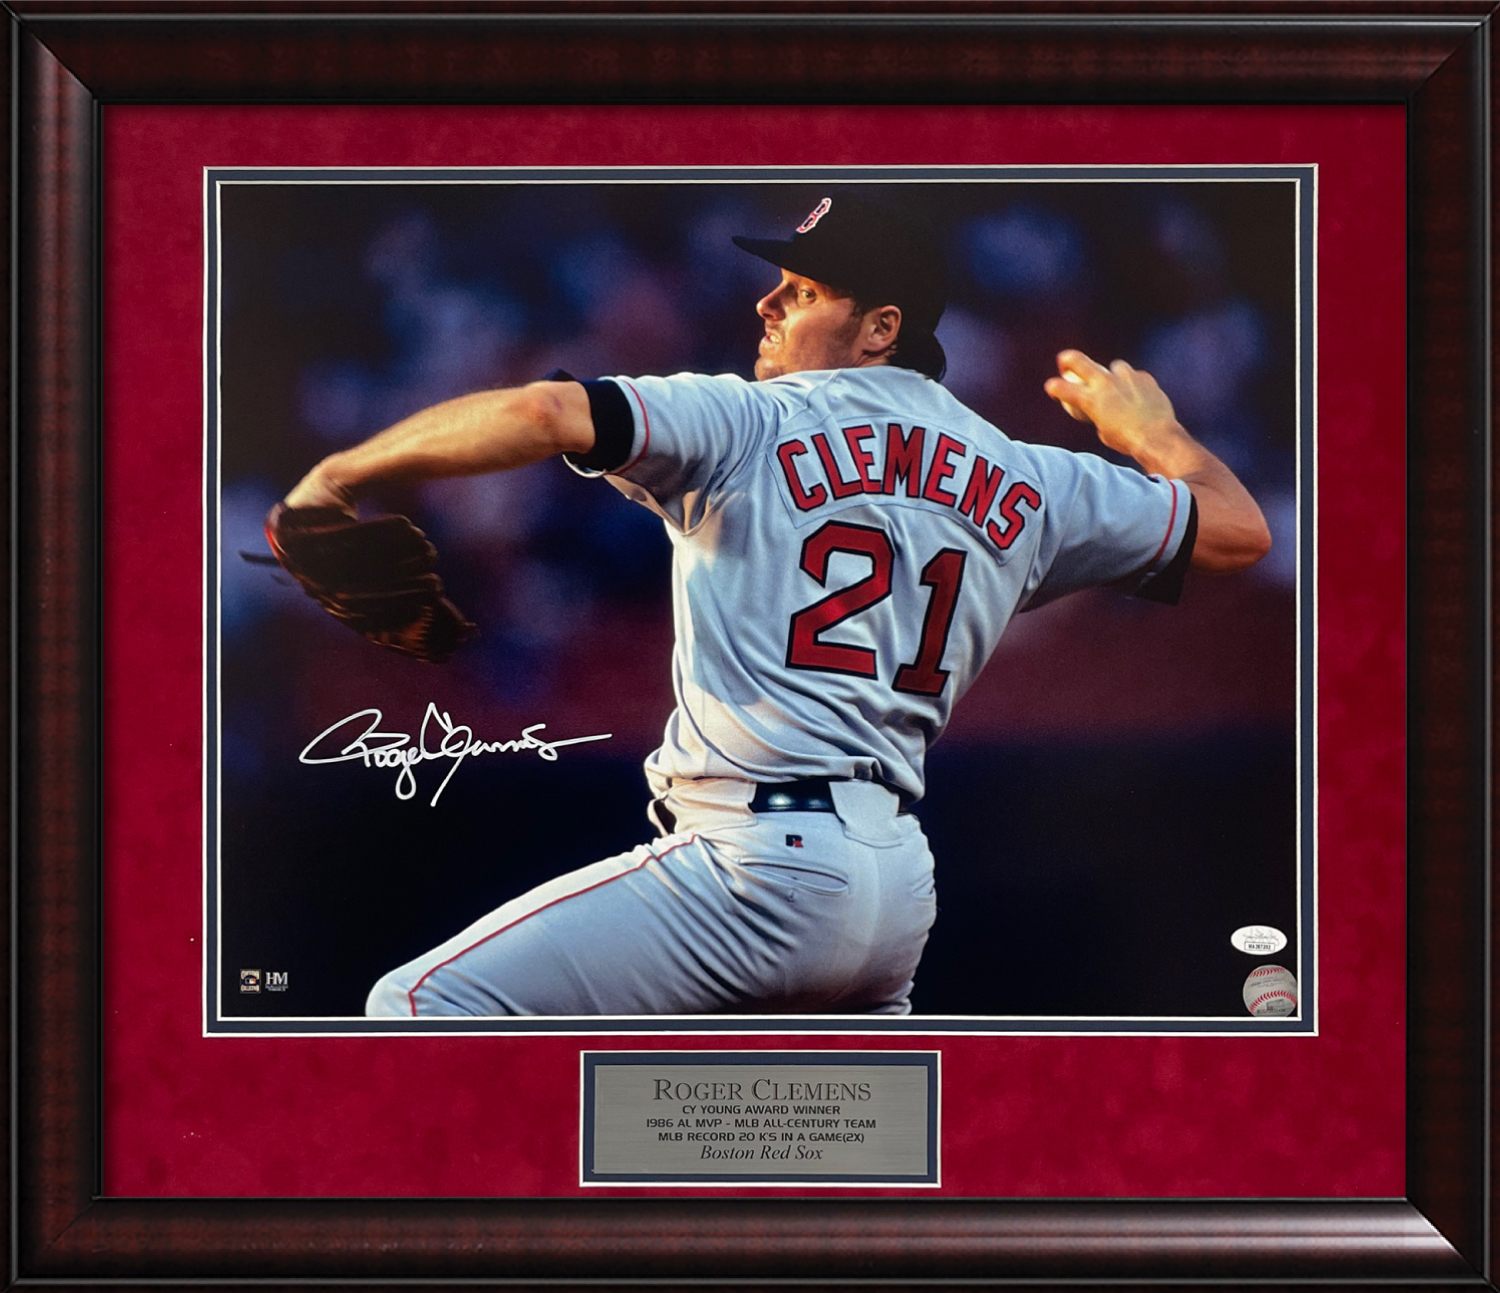 Roger Clemens Autographed Boston Red Sox Jersey - Detroit City Sports